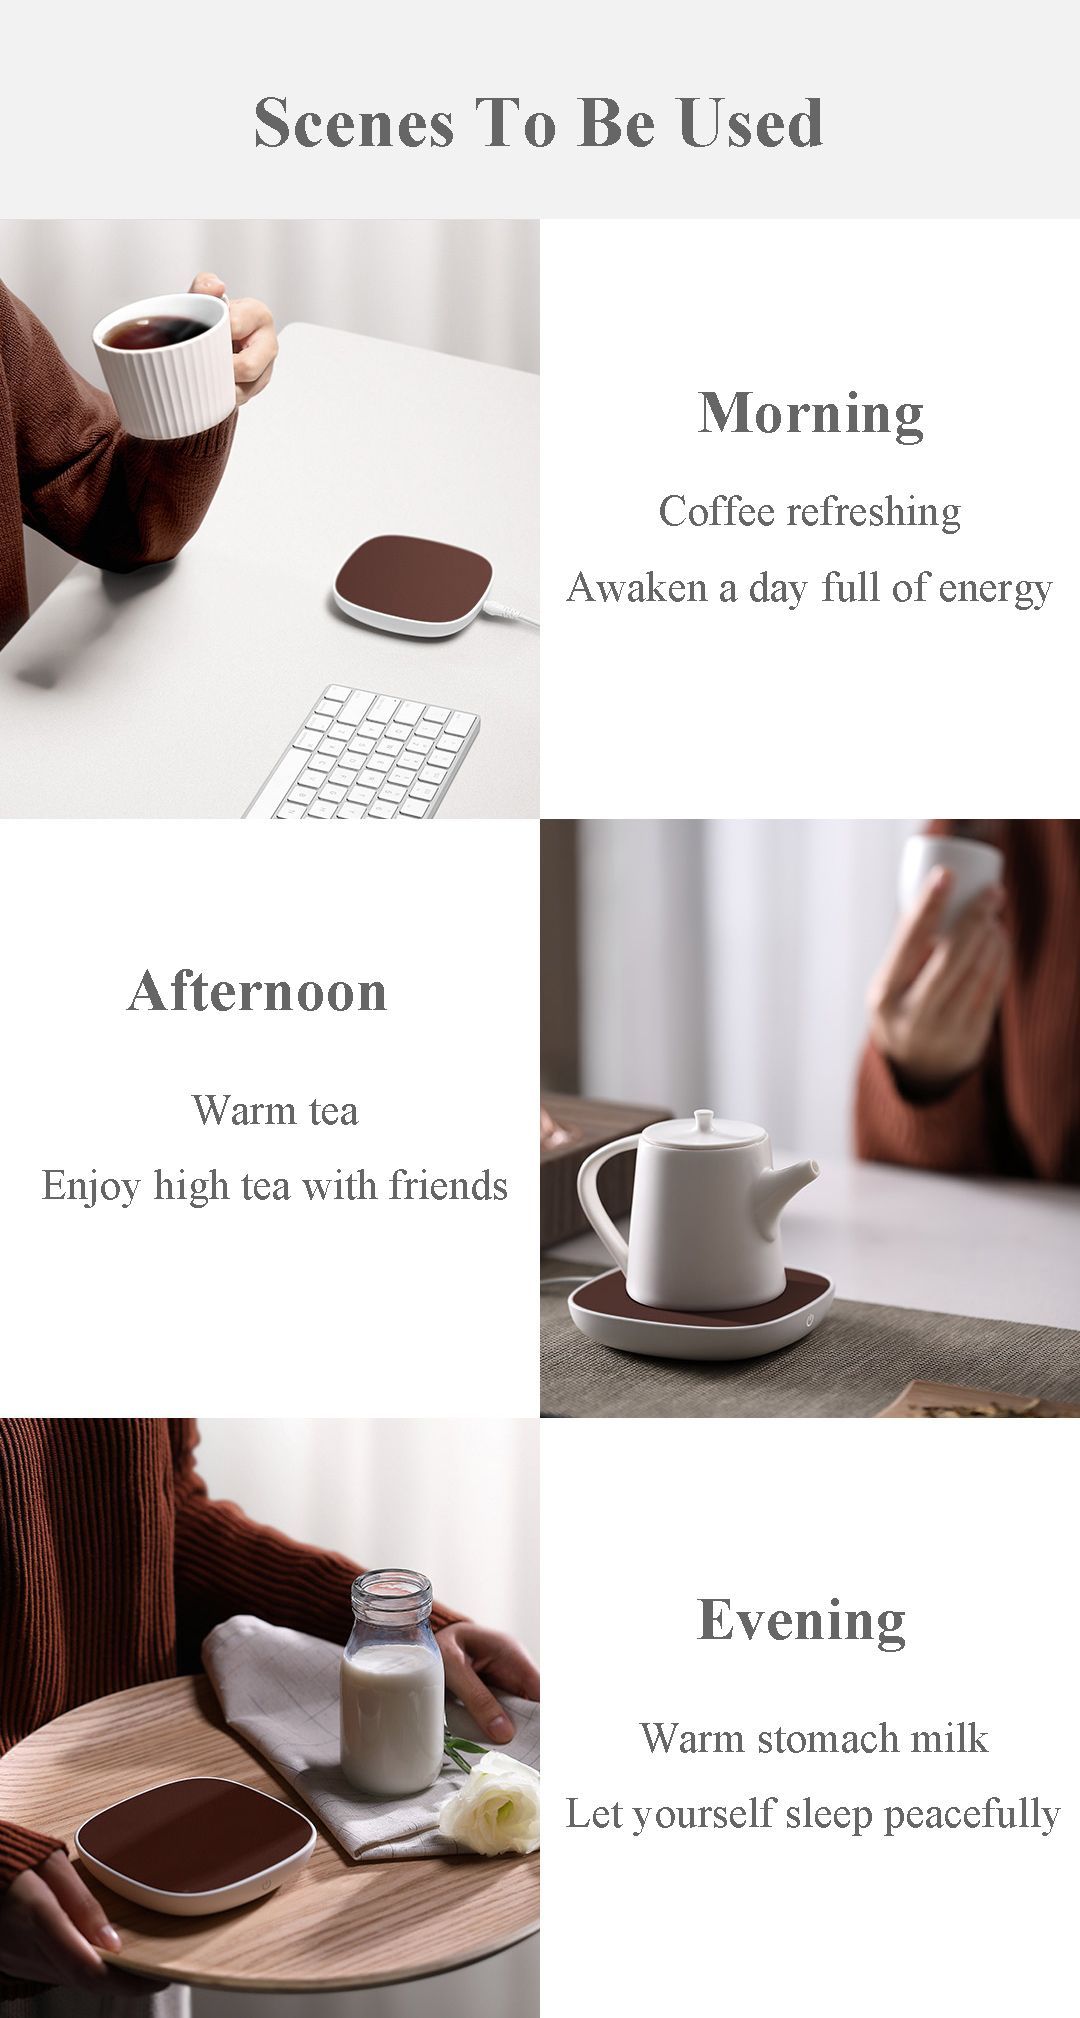 Sanjie-Electric-Tray-Coffee-Tea-USB-Drink-Warmer-Cup-Heater-55-Thermostat-Insulation-Base-Mat-1519163